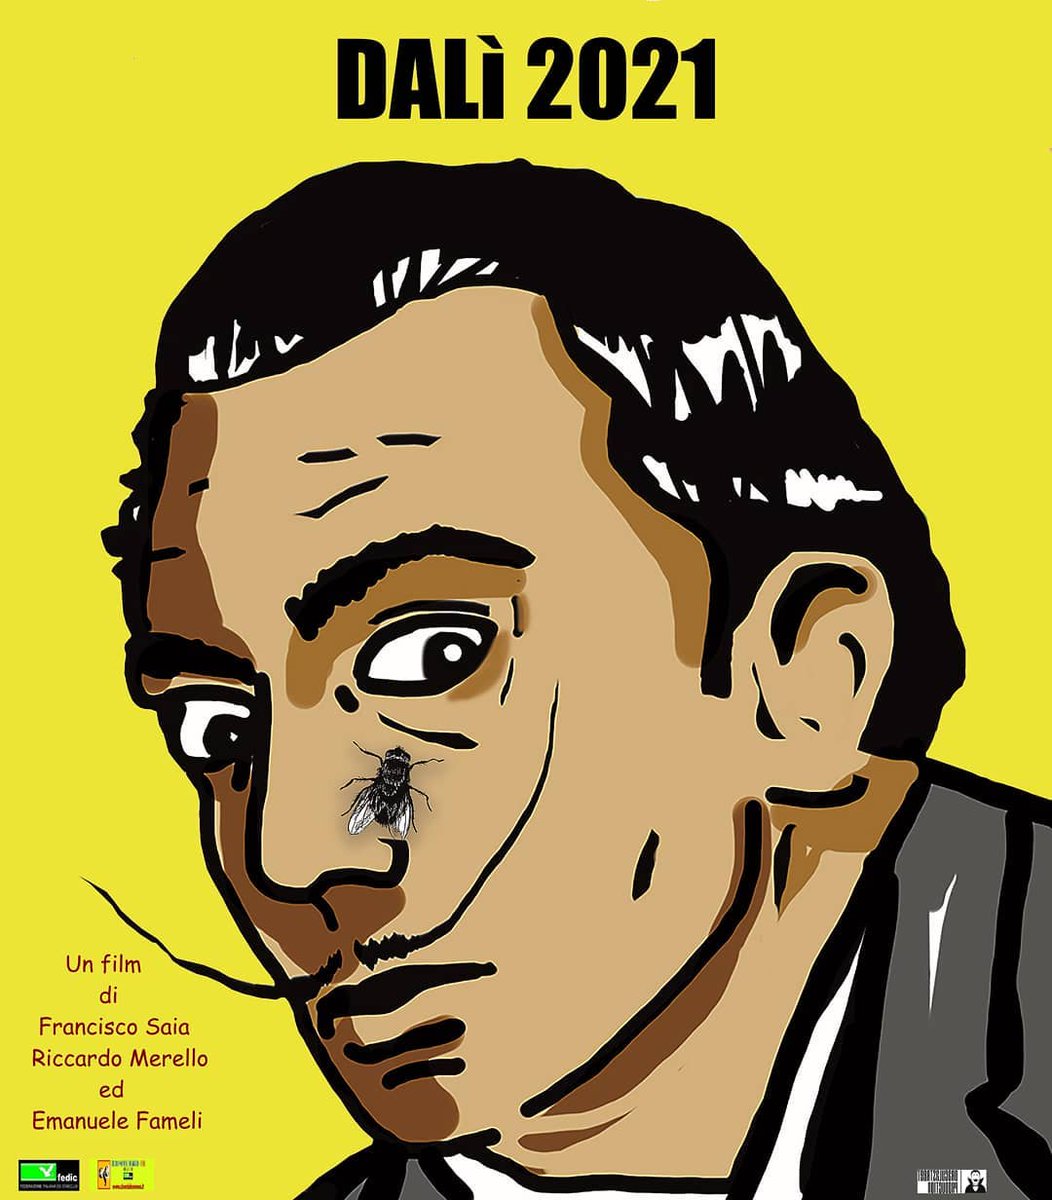 Dalì 2021 by #filmmaker Francisco Saia 2021. The earth reached its maximum degradation. Luis Akira, a 17 year old, founds 'Dali 21', a pacifist-revolutionary movement, to sleep & dream for eternity. #filmmaking #cinematographer #filmfestival #festival #opprimetv #dp #dop